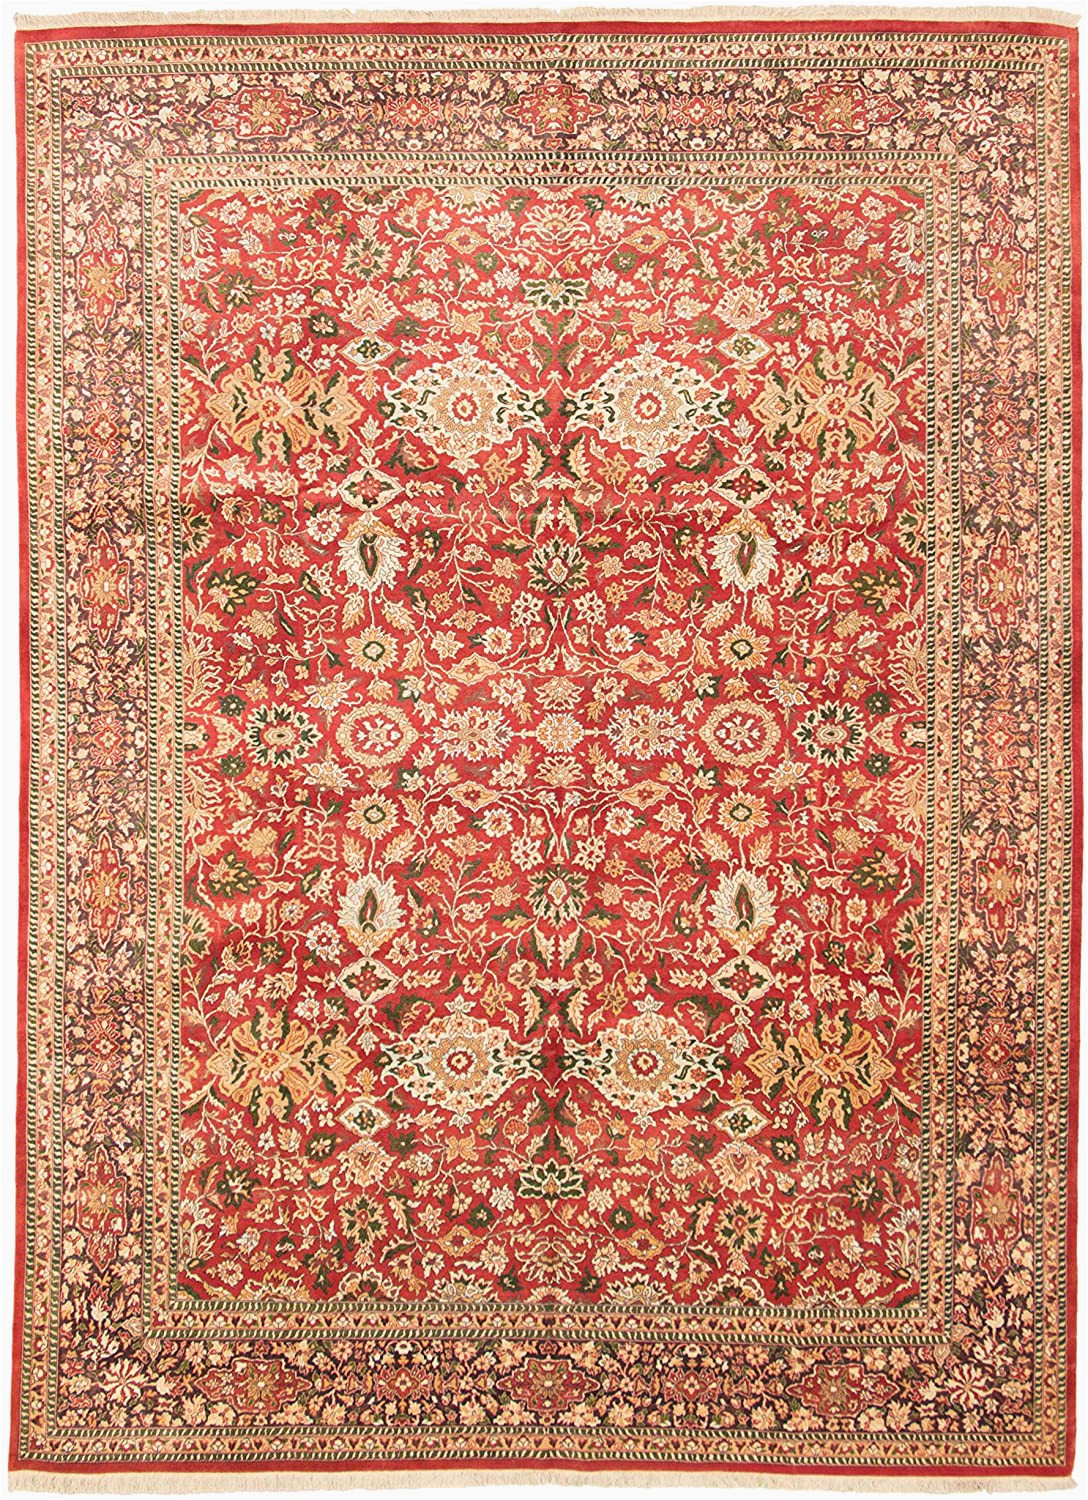 Large area Rugs 12 X 18 area Rug for Living Room Bedroom